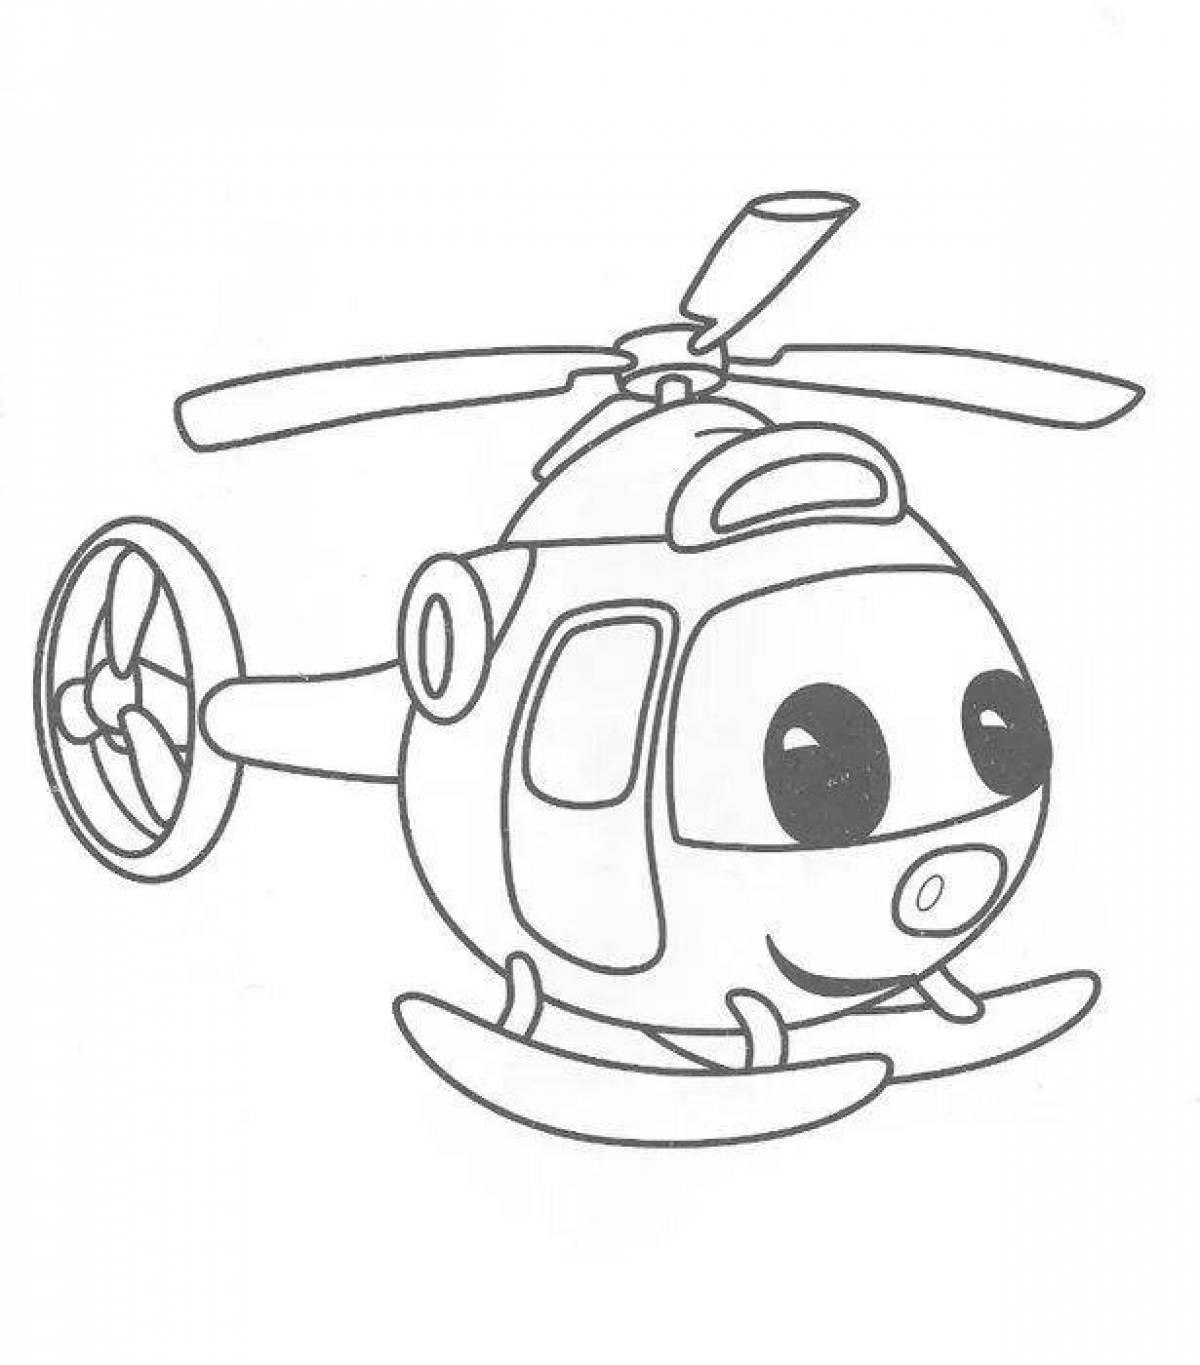 Adorable helicopter coloring page for kids